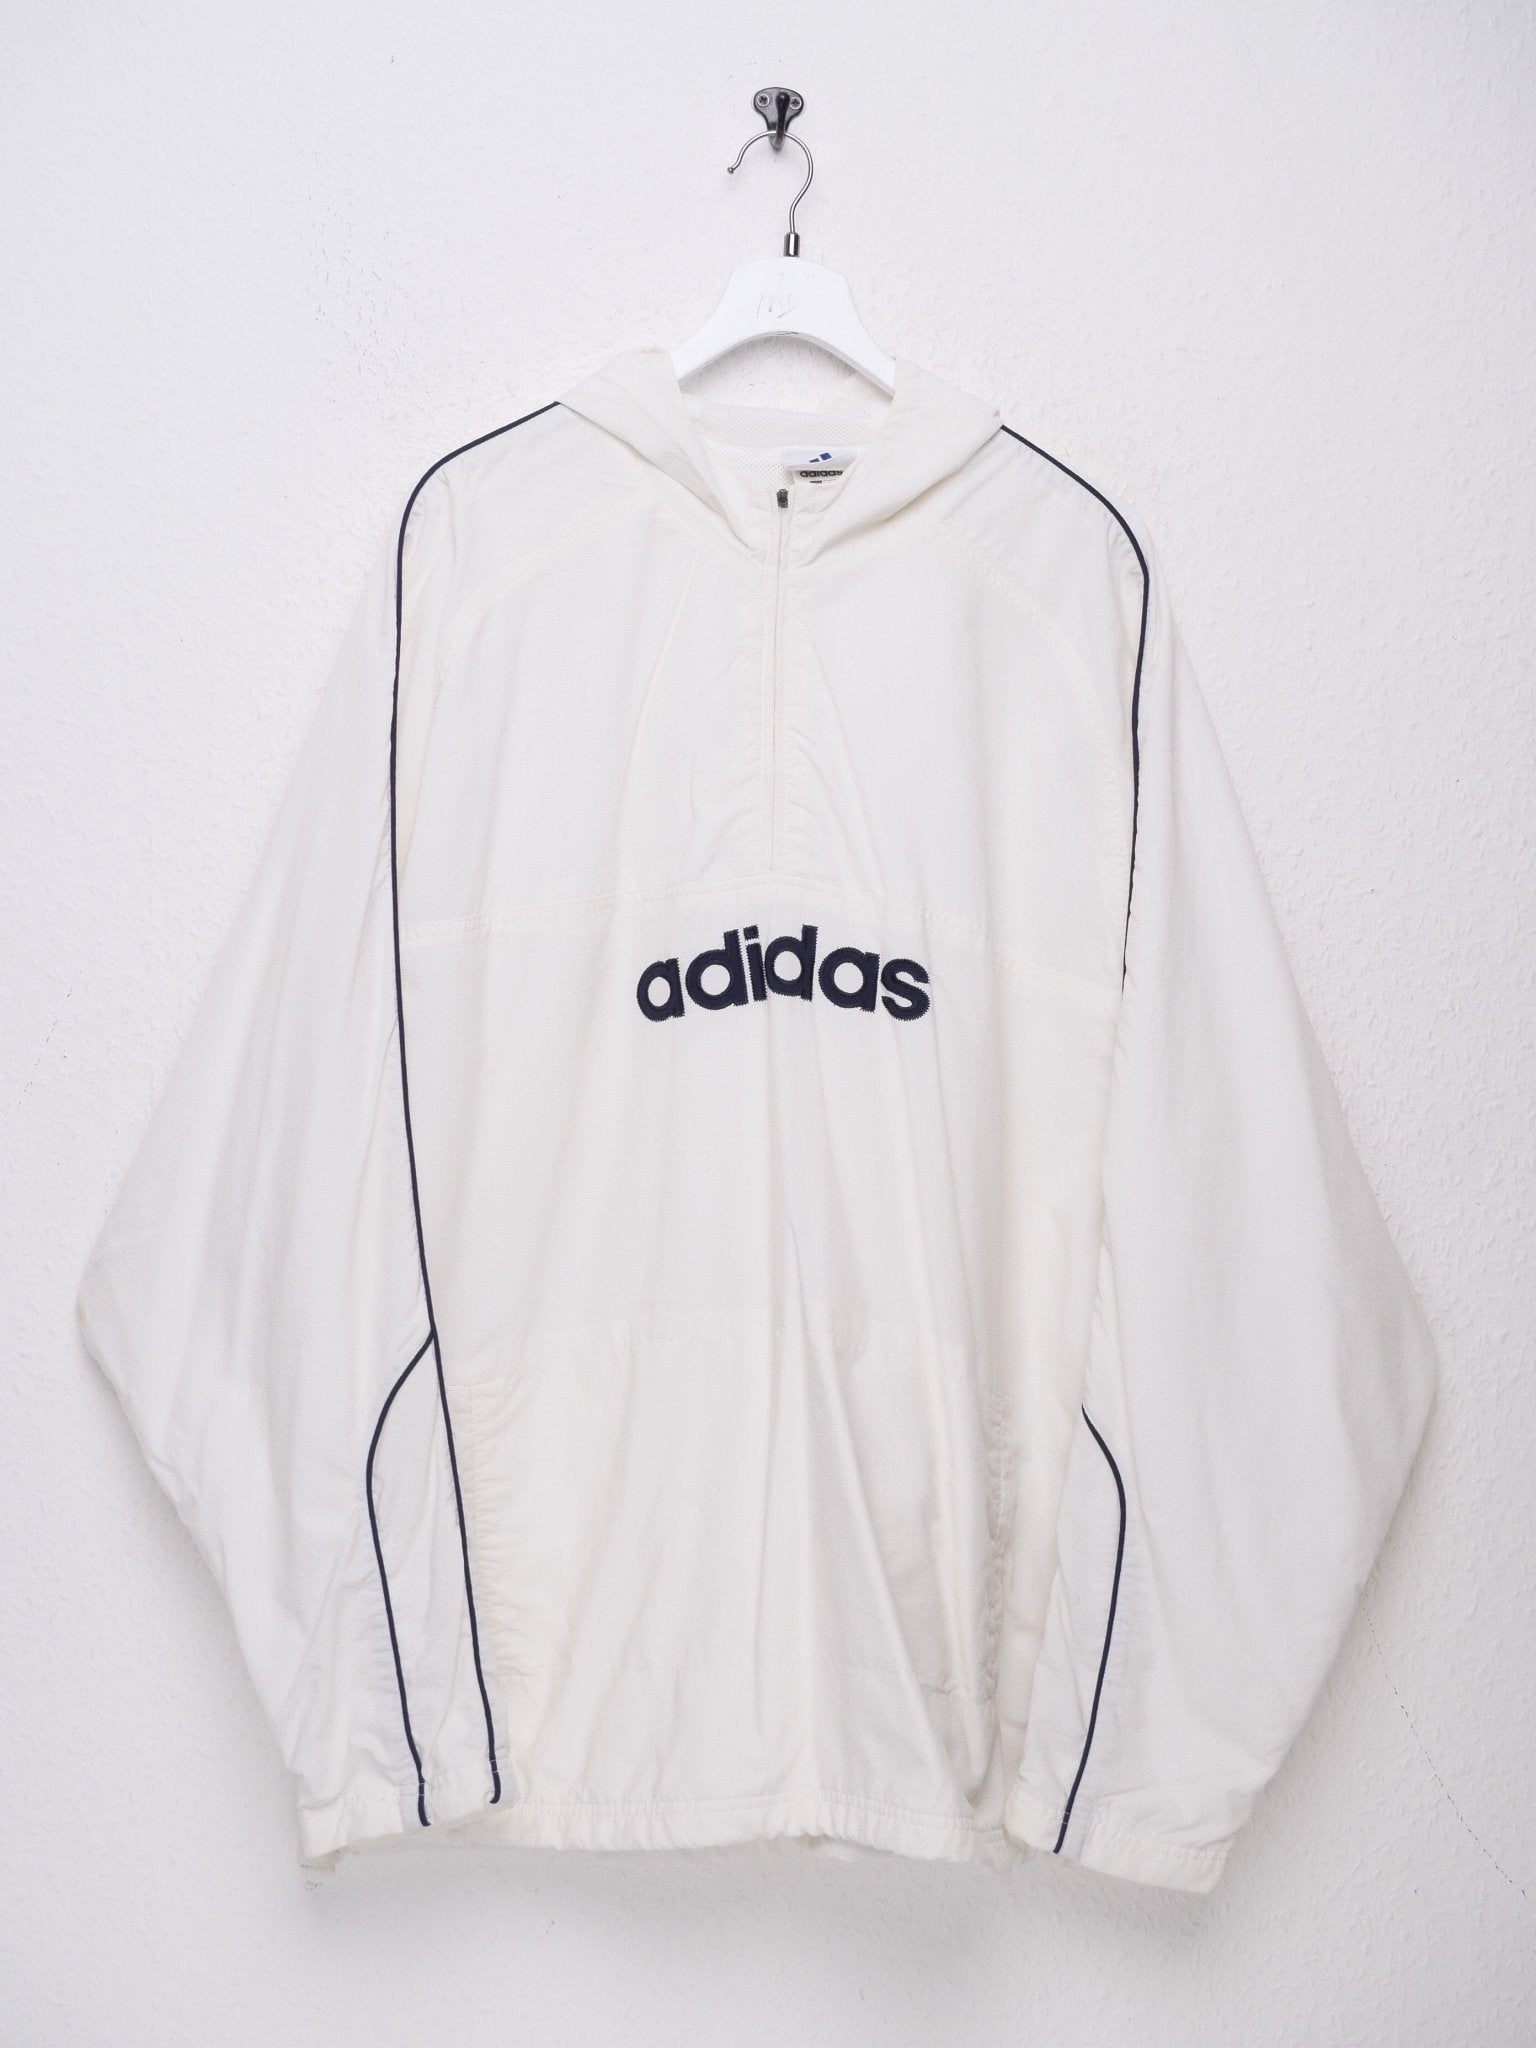 Adidas embroidered Spellout washed white Half Zip Windbreaker - Peeces